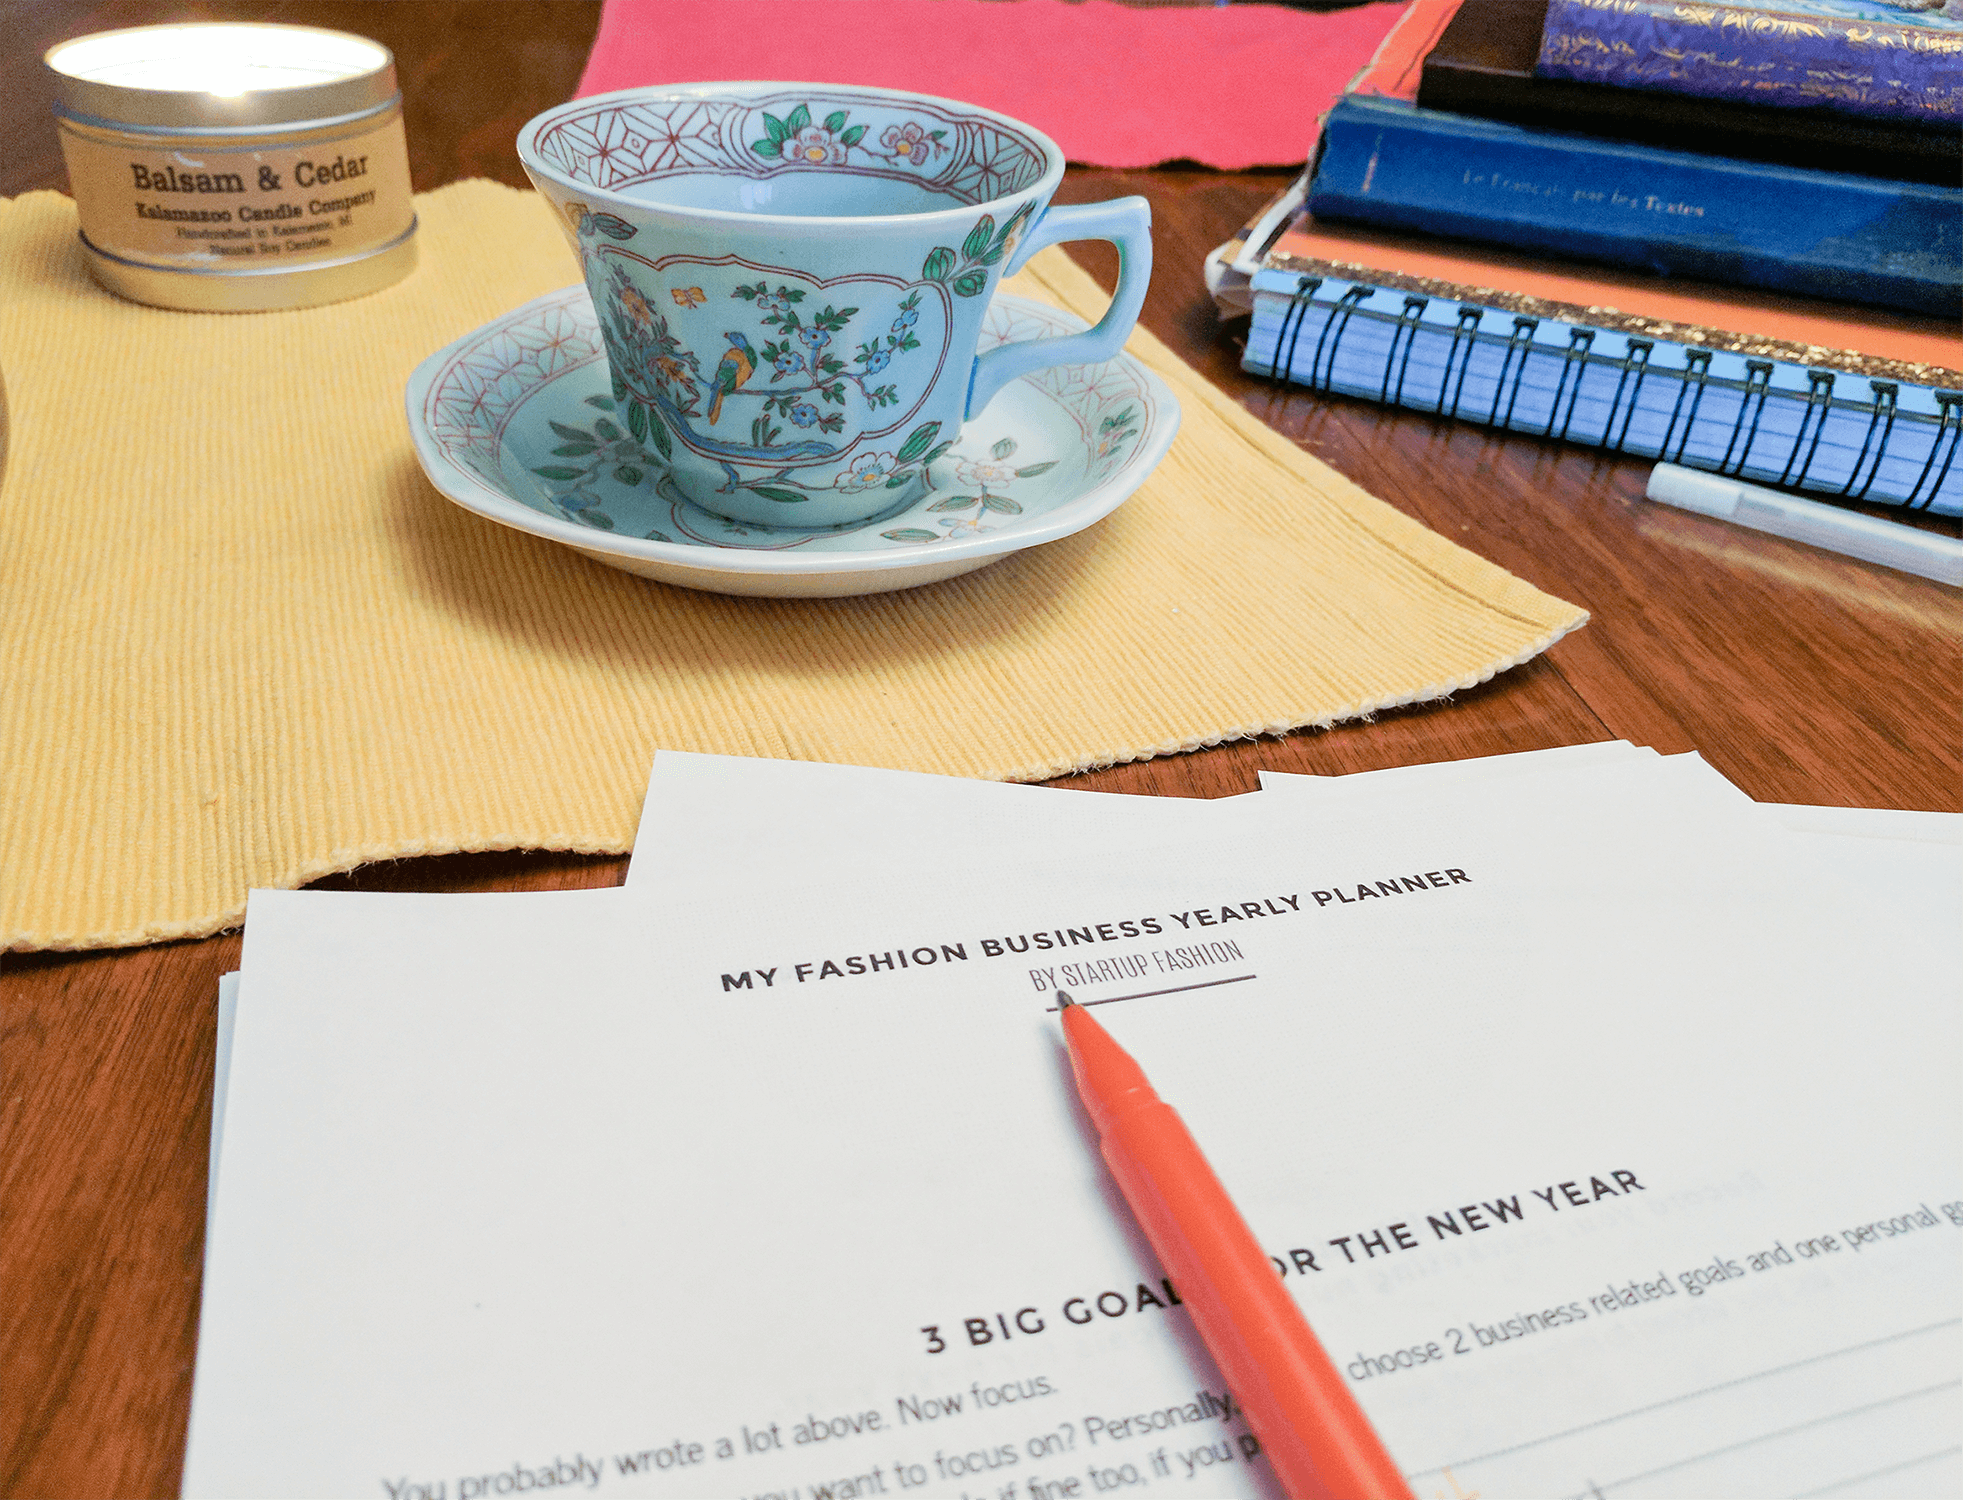 A table spread with notebooks, a beautiful old tea cup, and a burning candle. Startup Fashion's yearly planner is in the foreground with an orange pen.